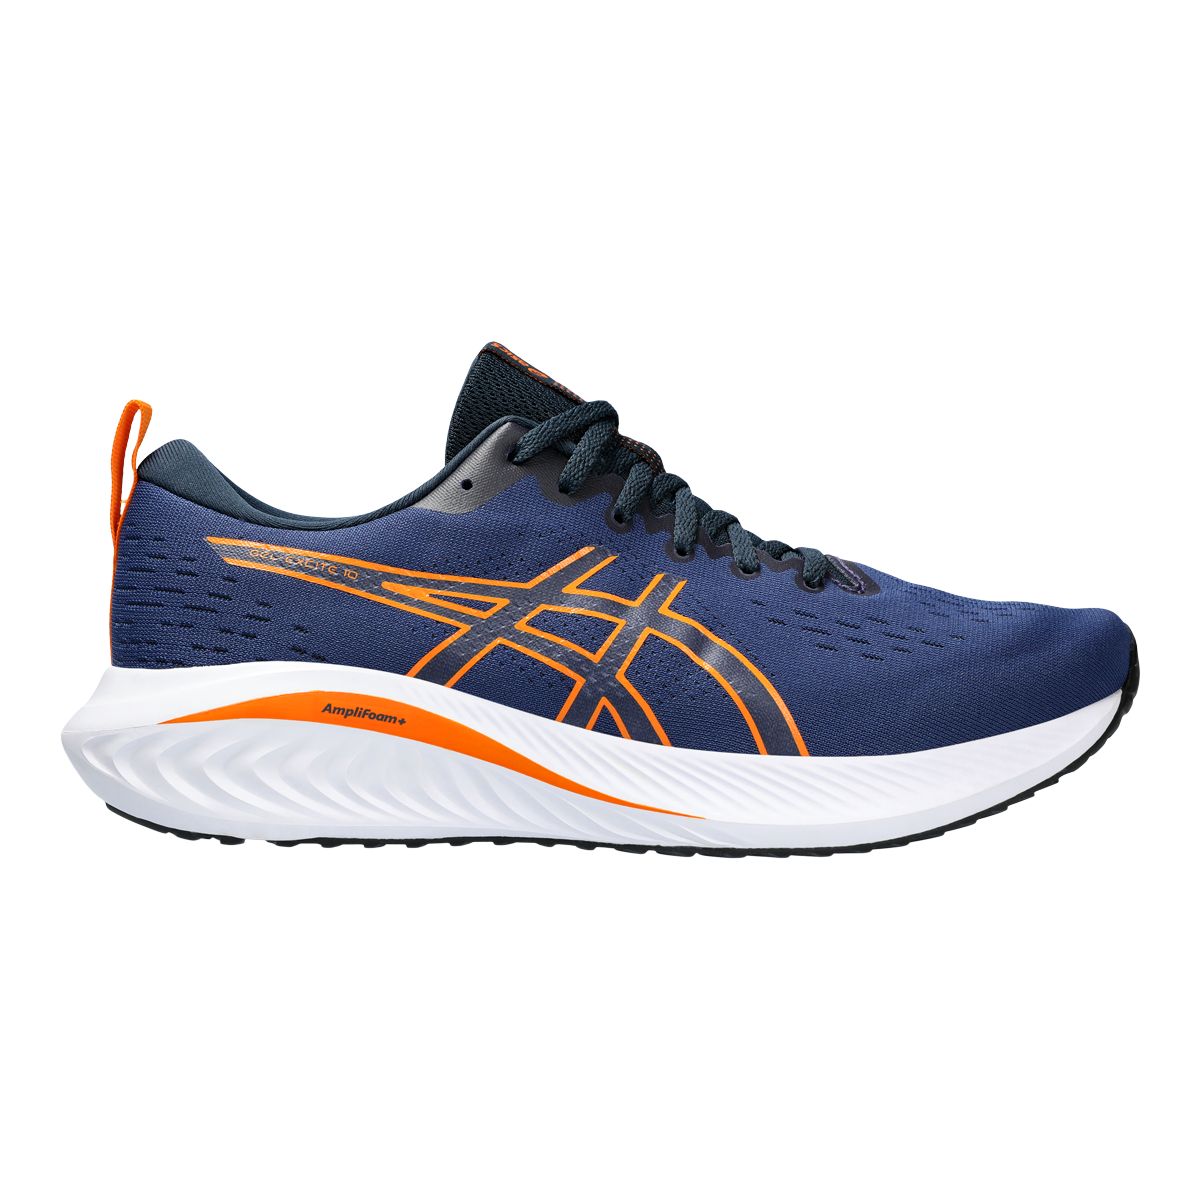 Image of Asics Men's Gel-Excite 1 Lightweight Mesh Cushioned Running Shoes